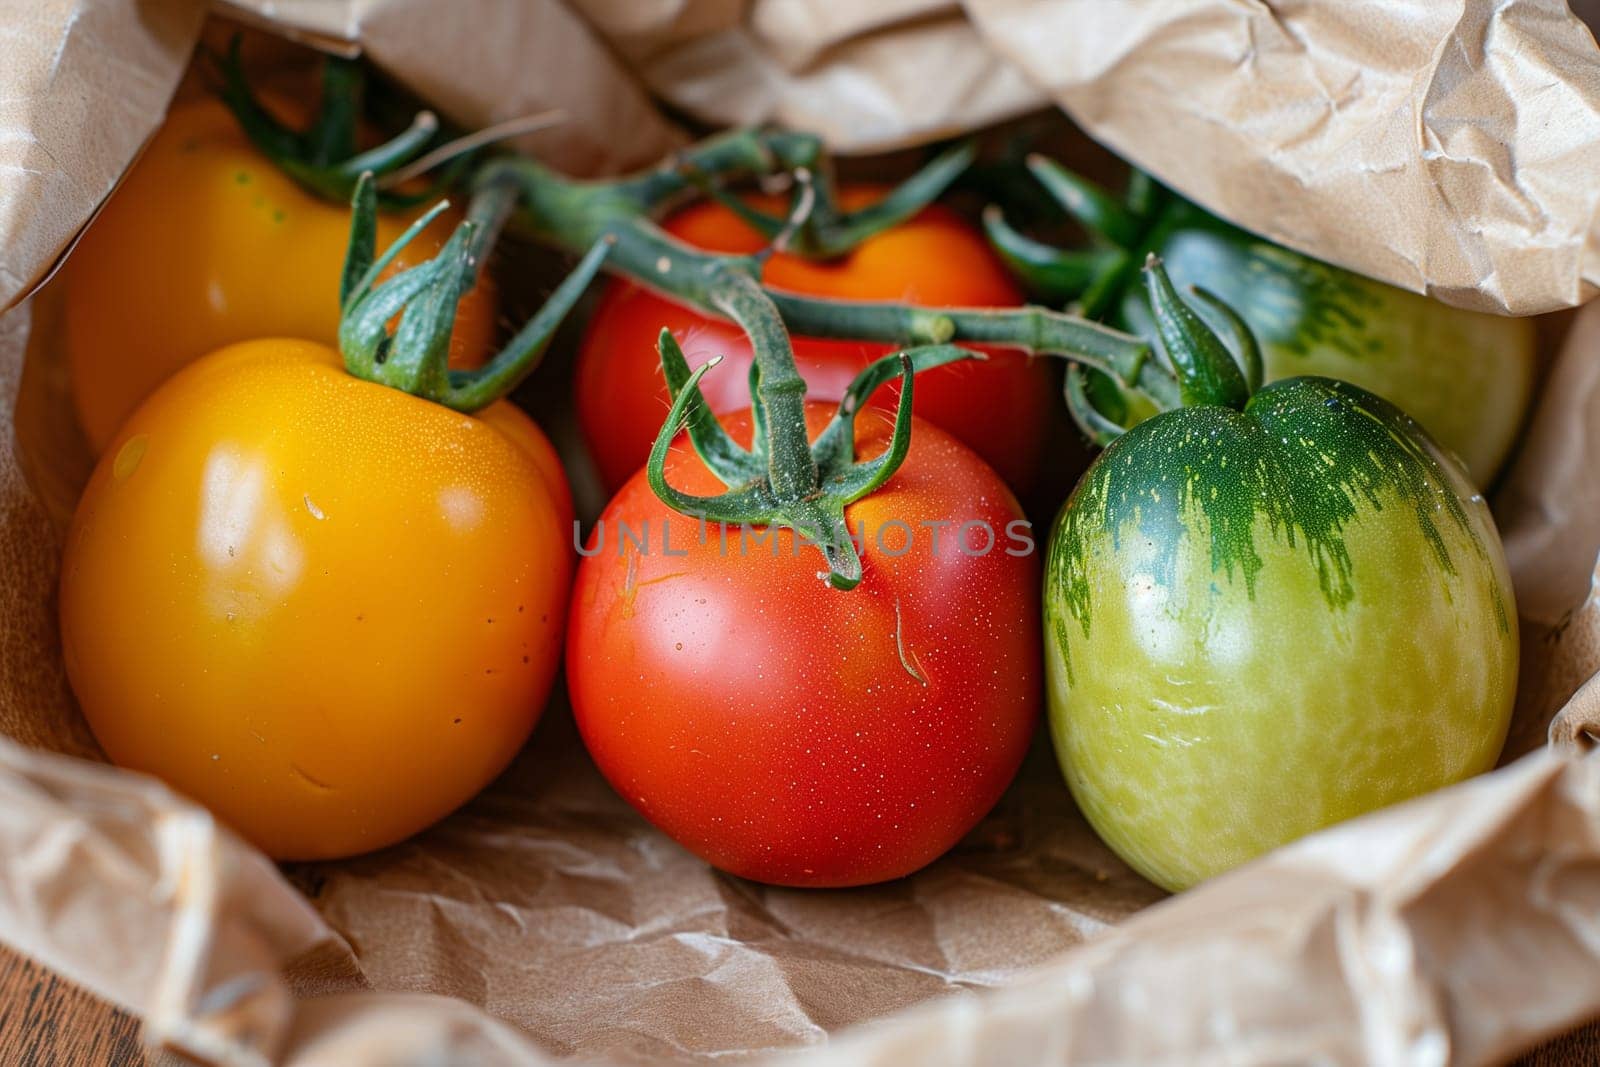 Various vibrant tomatoes of different colors placed in a paper bag.